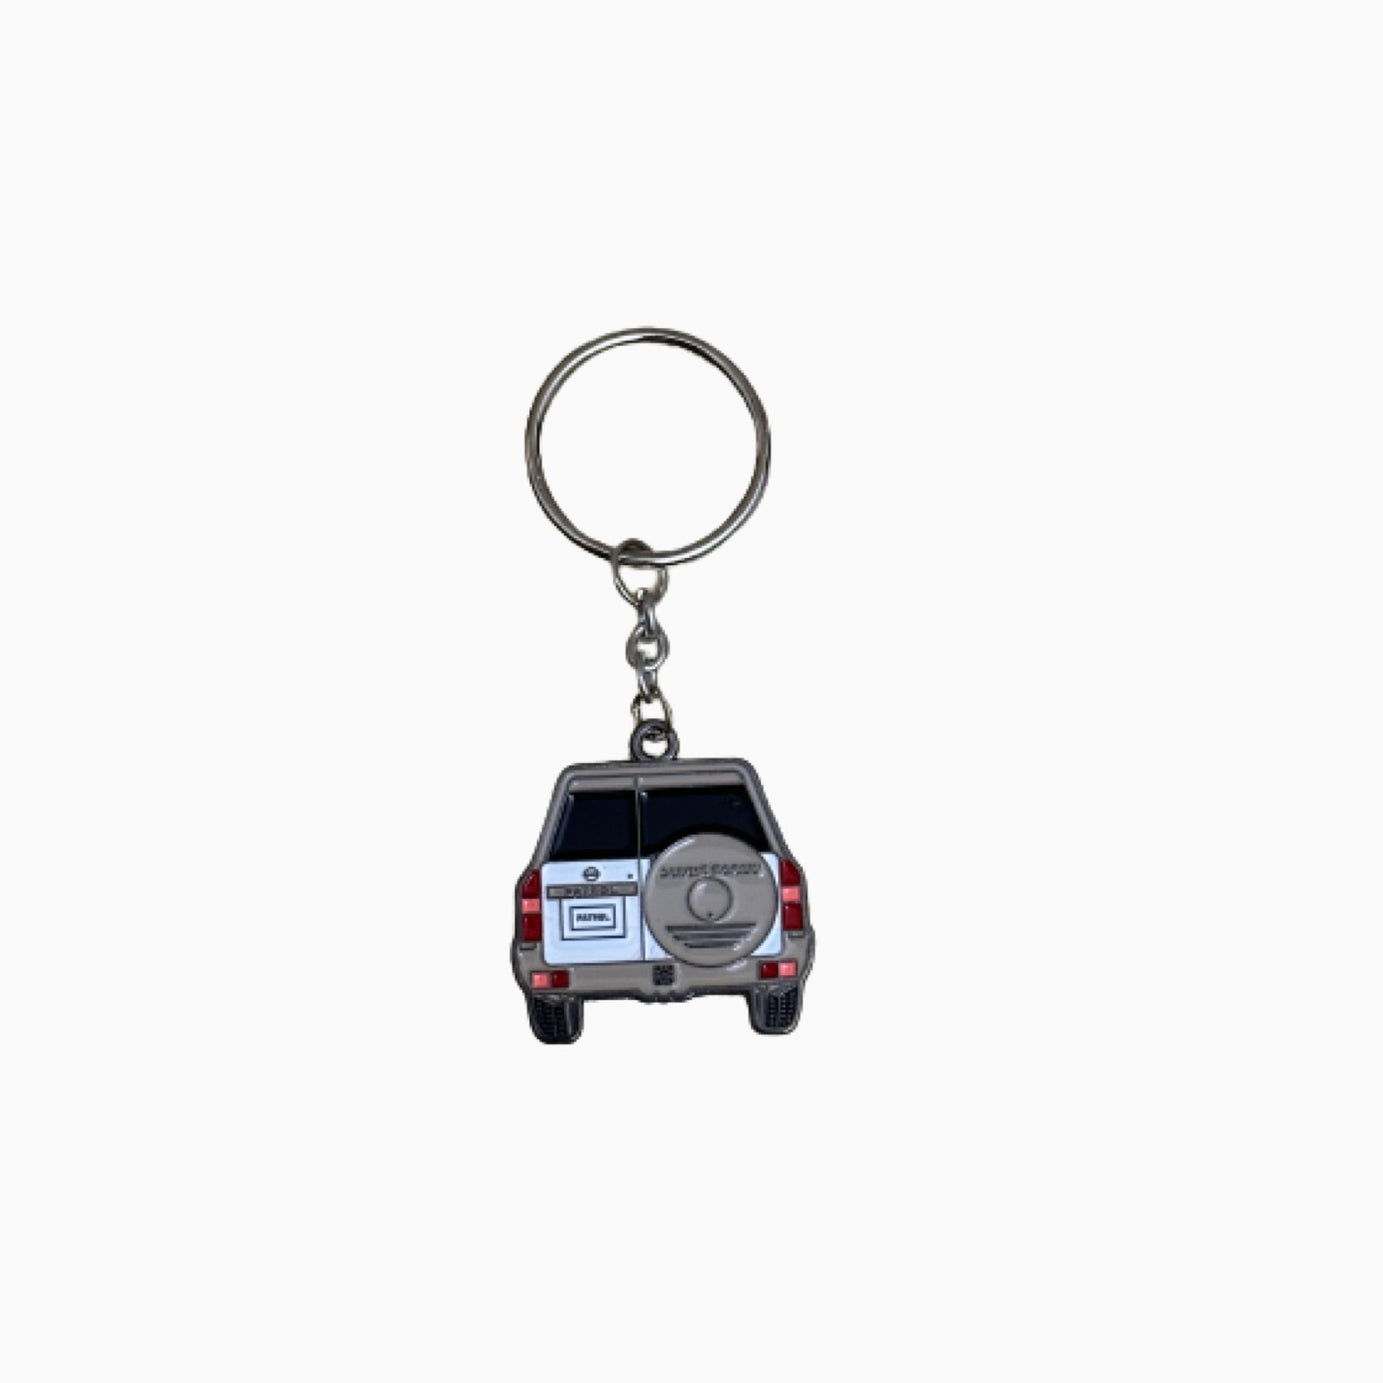 Keychain with a white VTC image